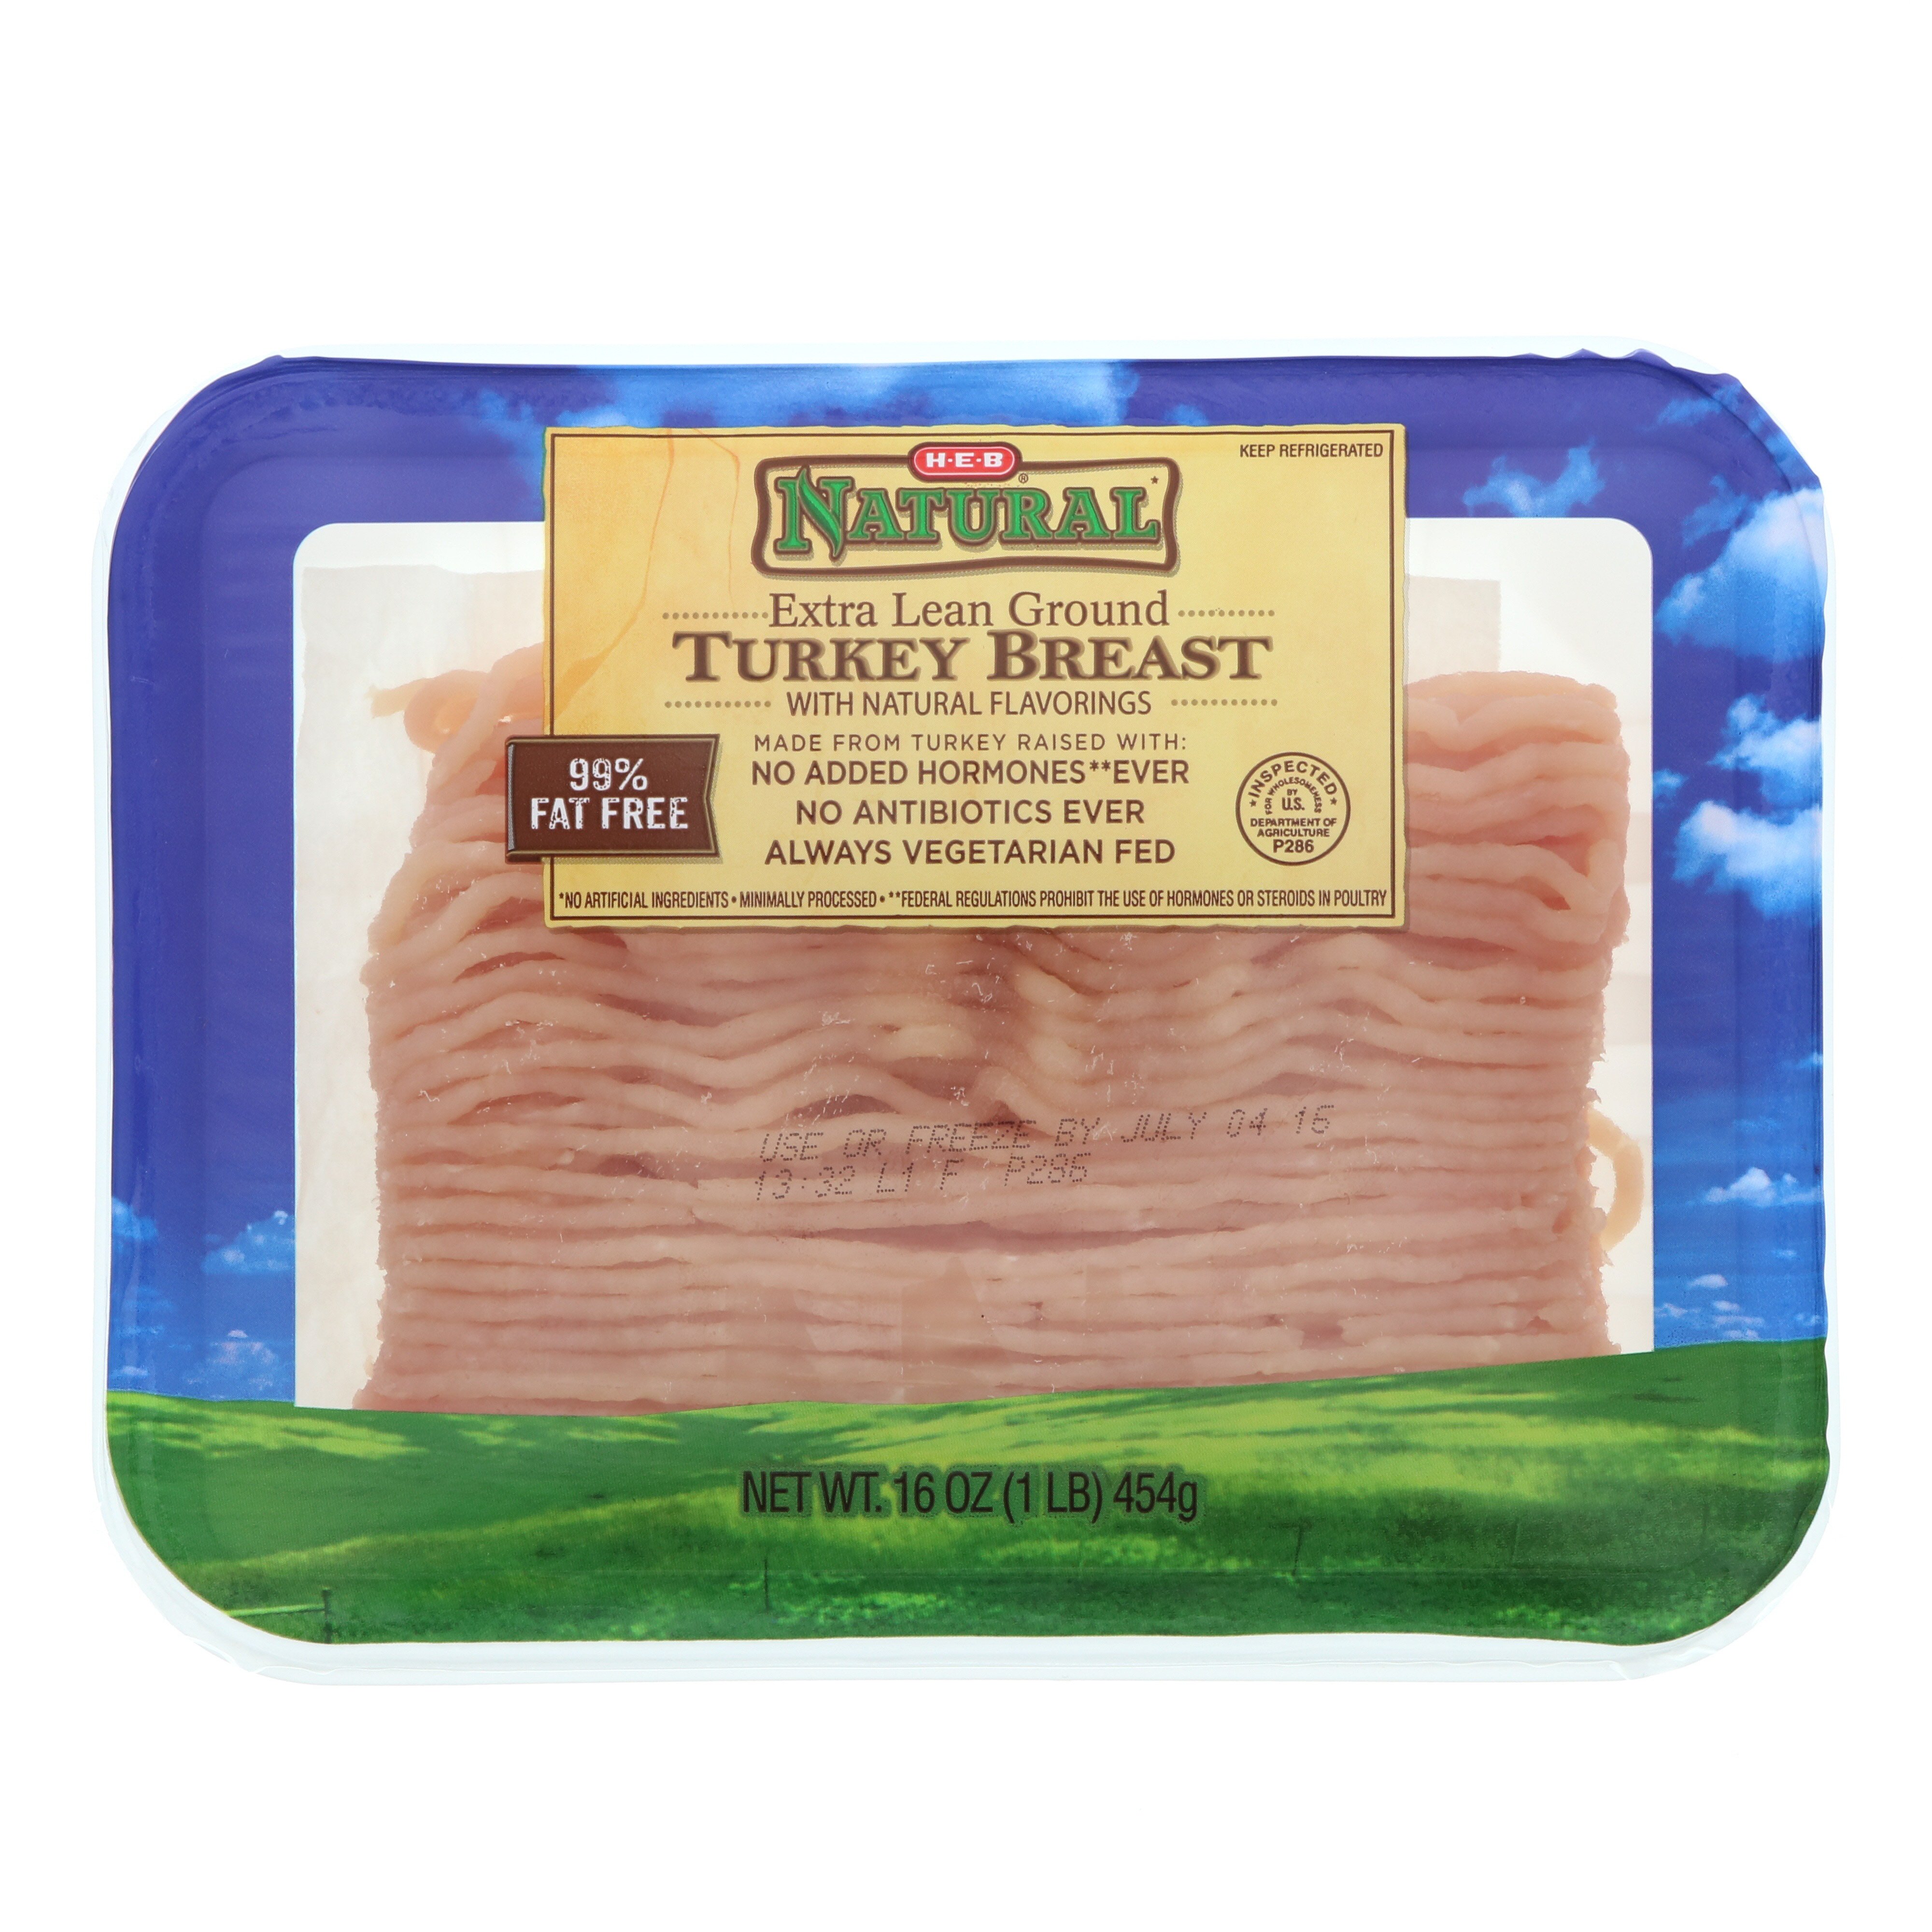 How many calories are in 1 pound of ground turkey H E B Natural Extra Lean Ground Turkey Breast 99 Lean Shop Turkey At H E B